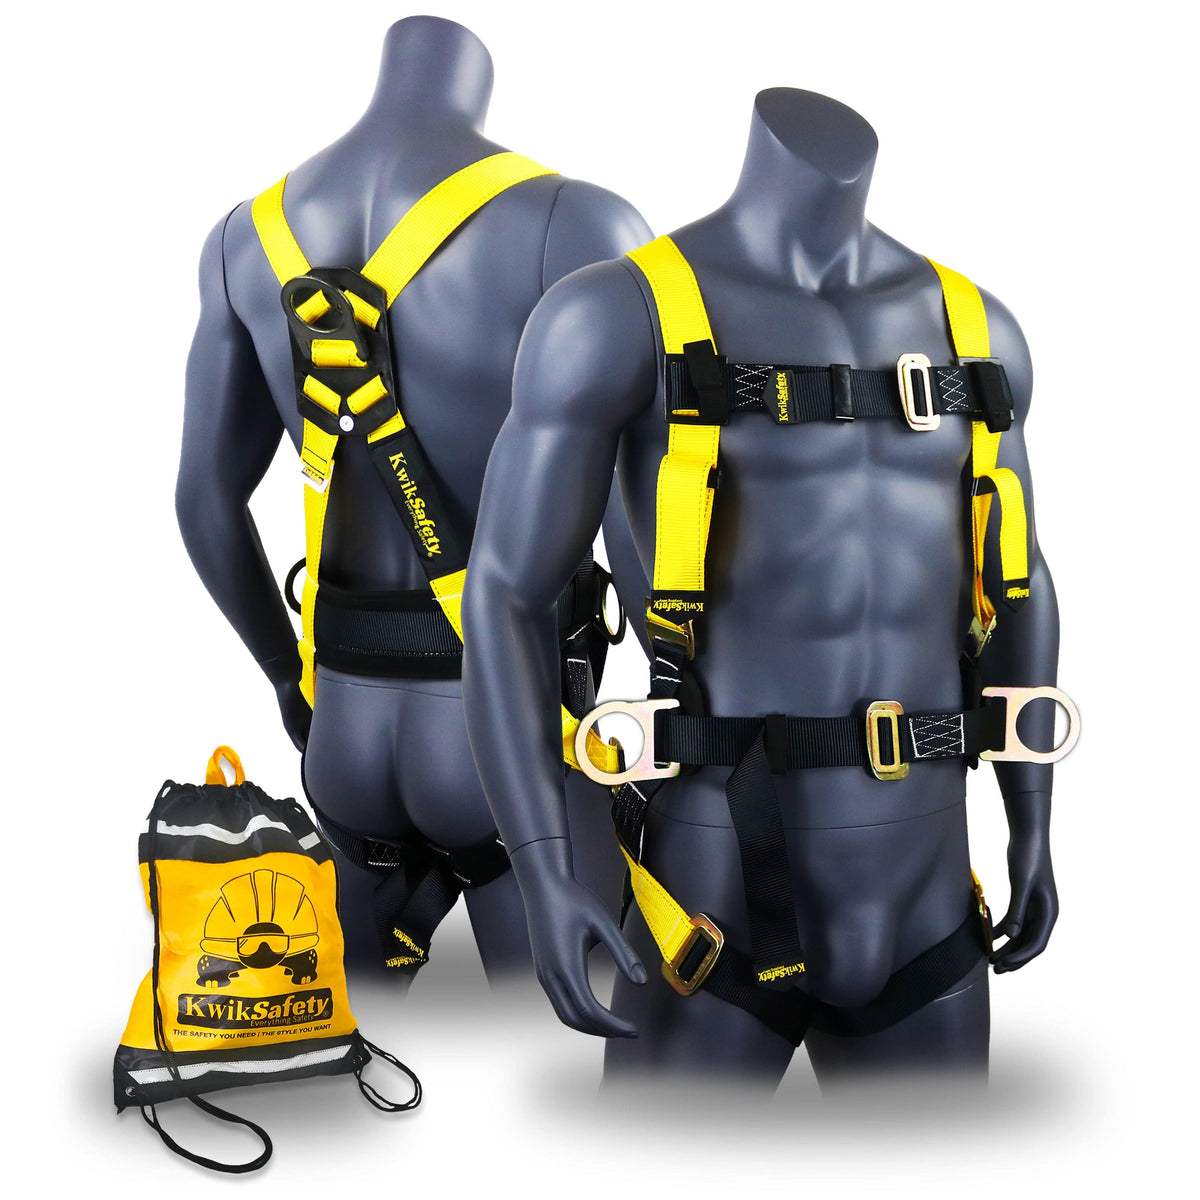 KwikSafety HURRICANE Safety Harness ANSI Fall Protection 3D Ring + Back  Support - Model No.: KS6603